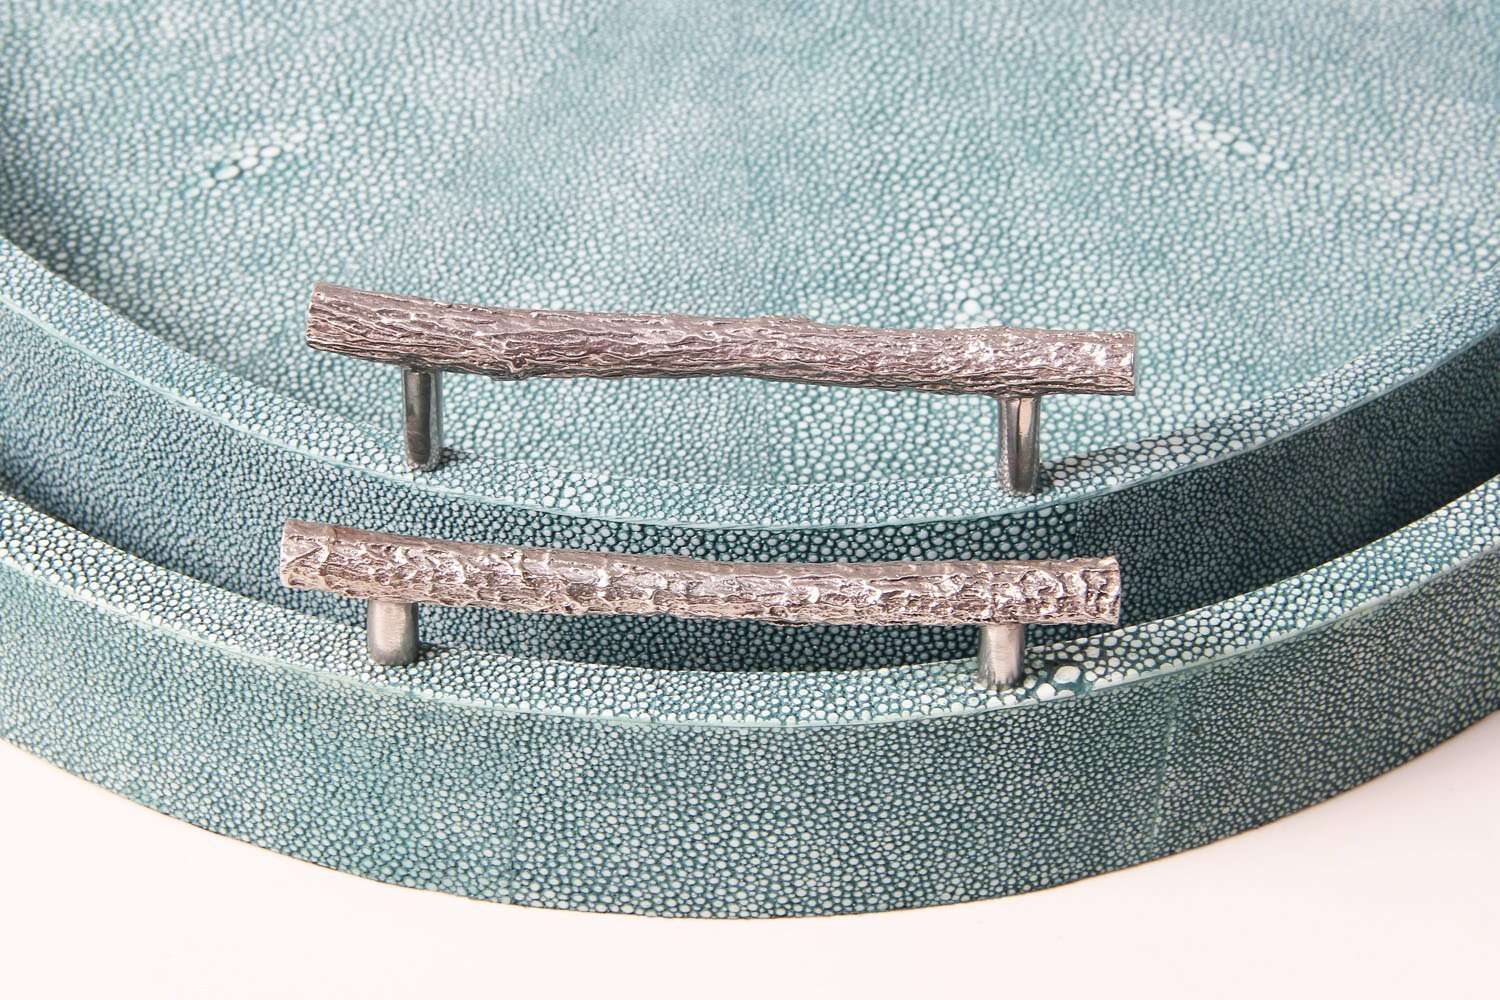 Serving tray unique Forwood Design teal shagreen servings tray